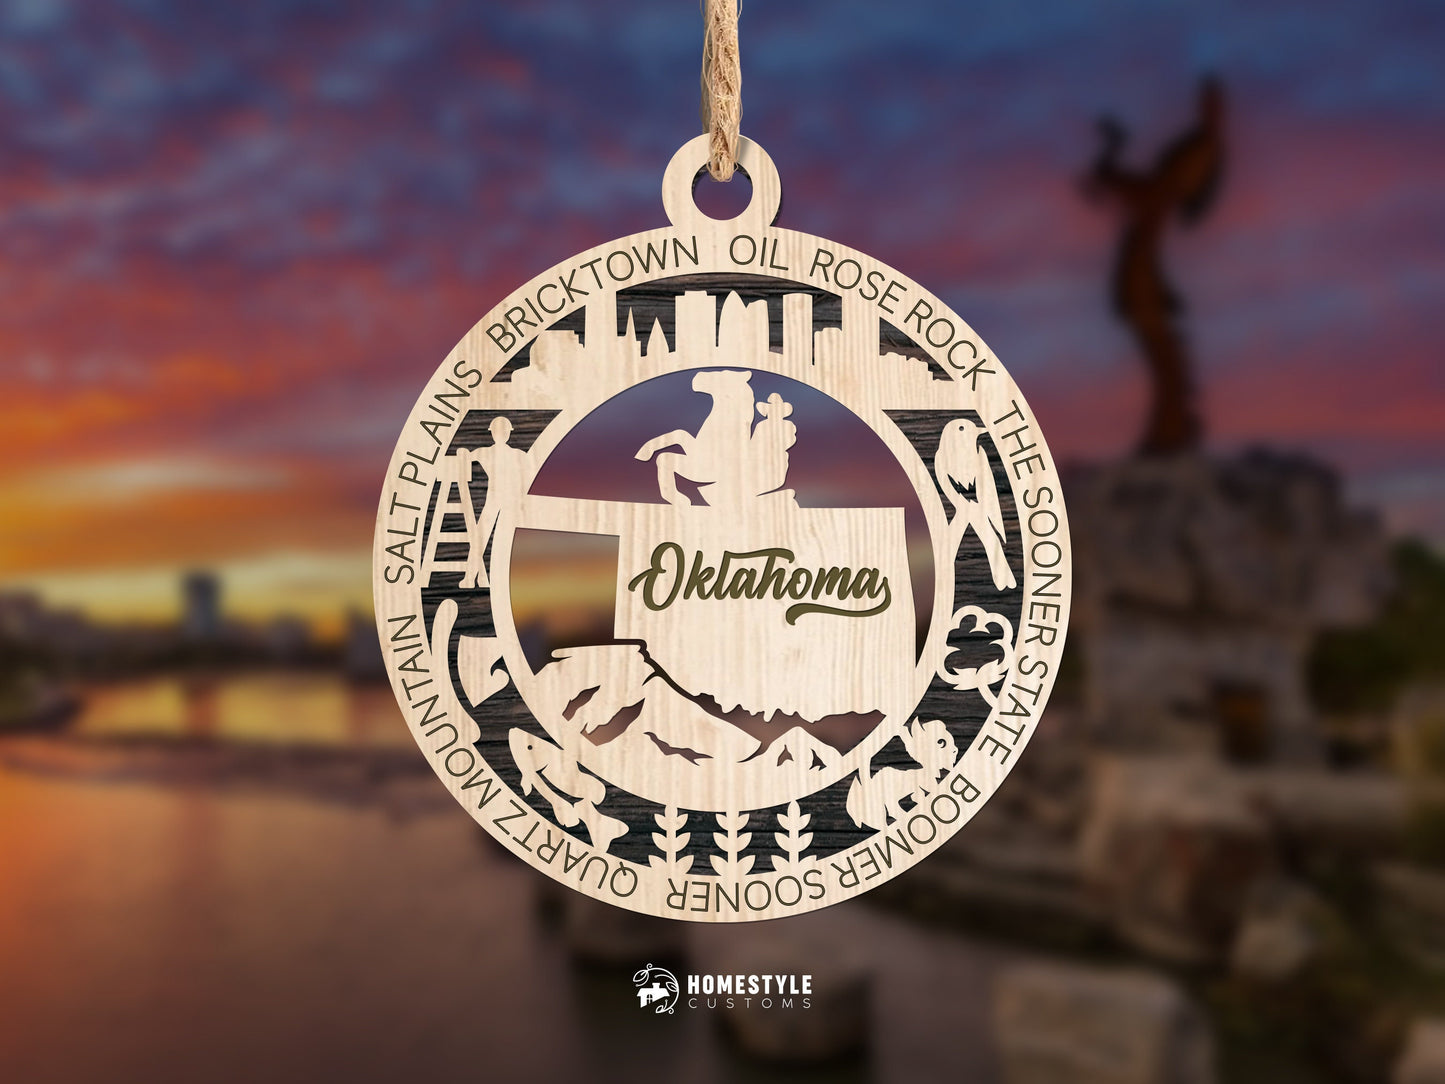 Oklahoma State Ornament - SVG File Download - Sized for Glowforge - Laser Ready Digital Files